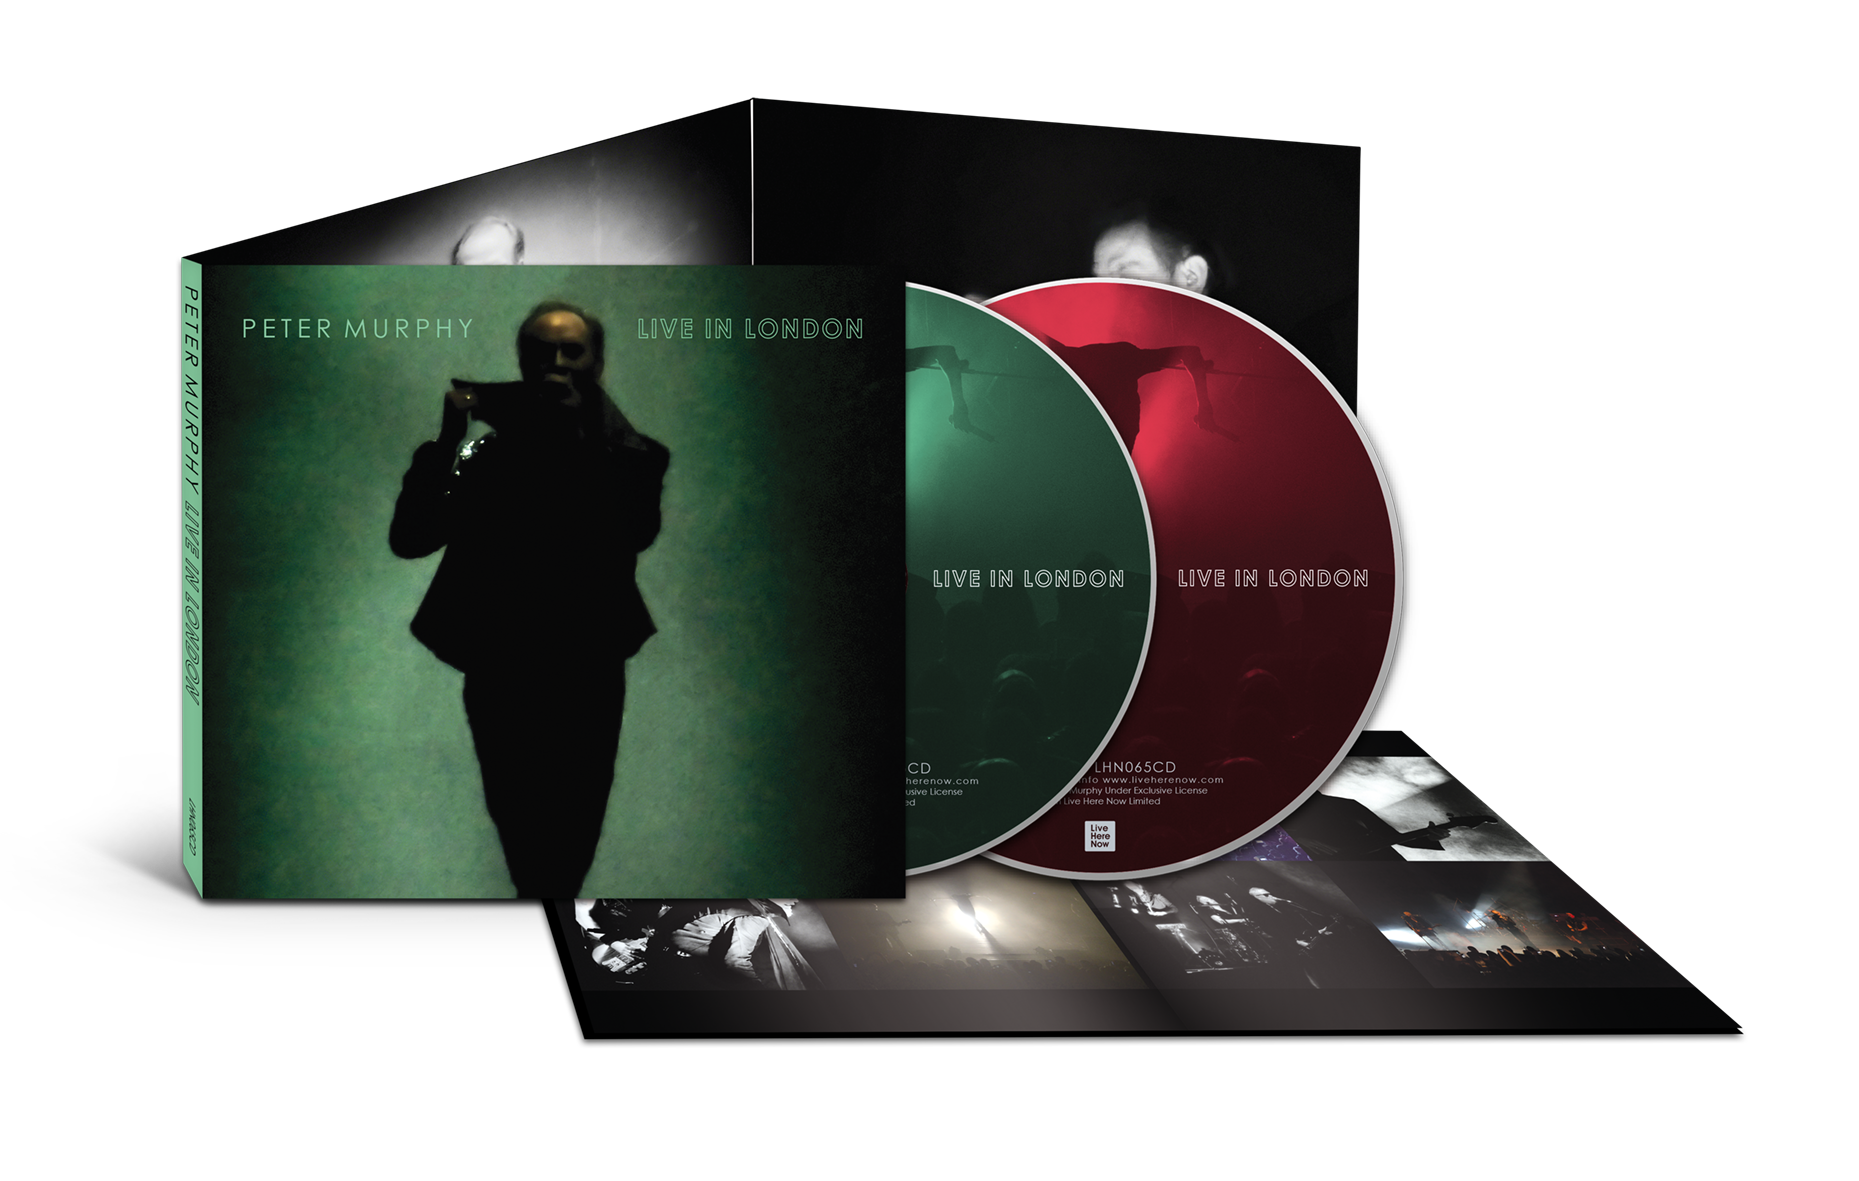 Peter Murphy - Live In London - Deluxe double CD and 12 page booklet.